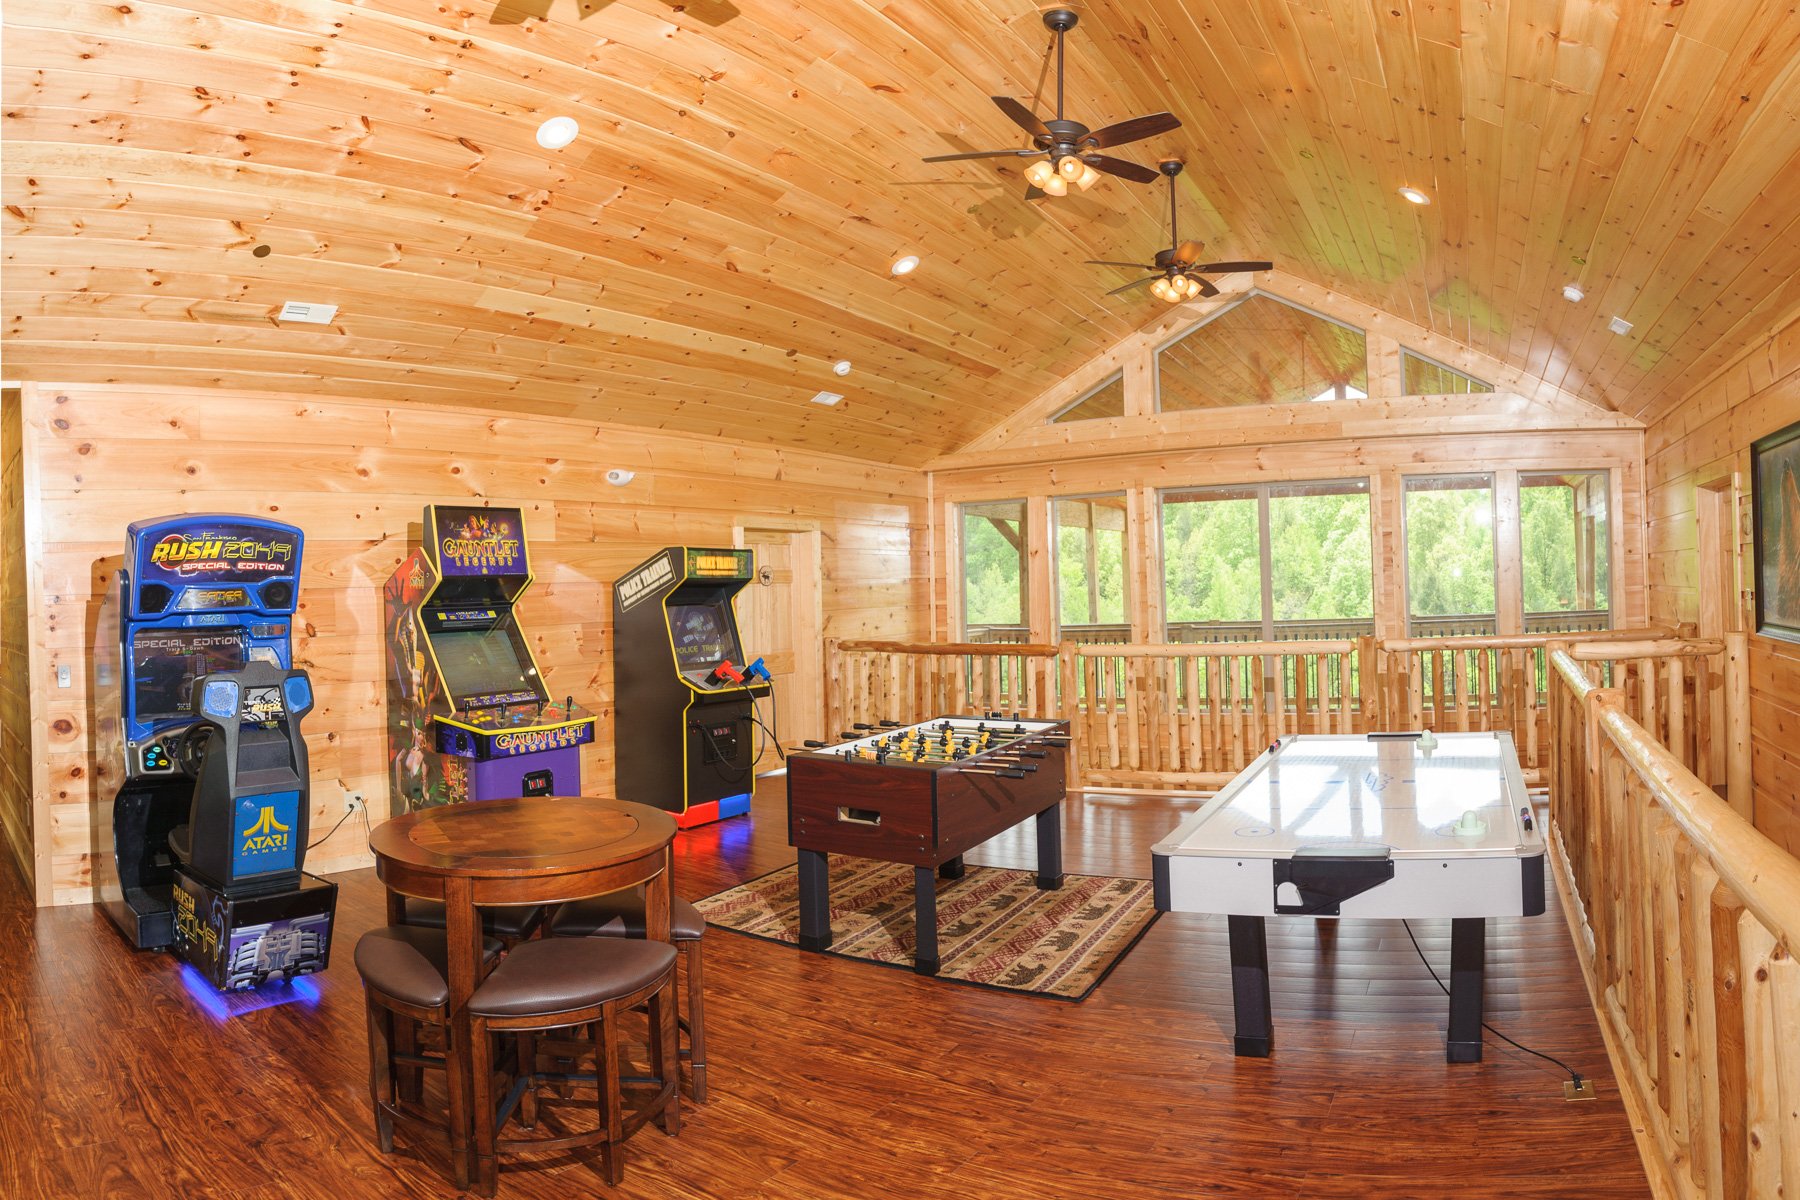 Arcade machines, a foosball table, and an air hockey table highlight the upper floor game room.